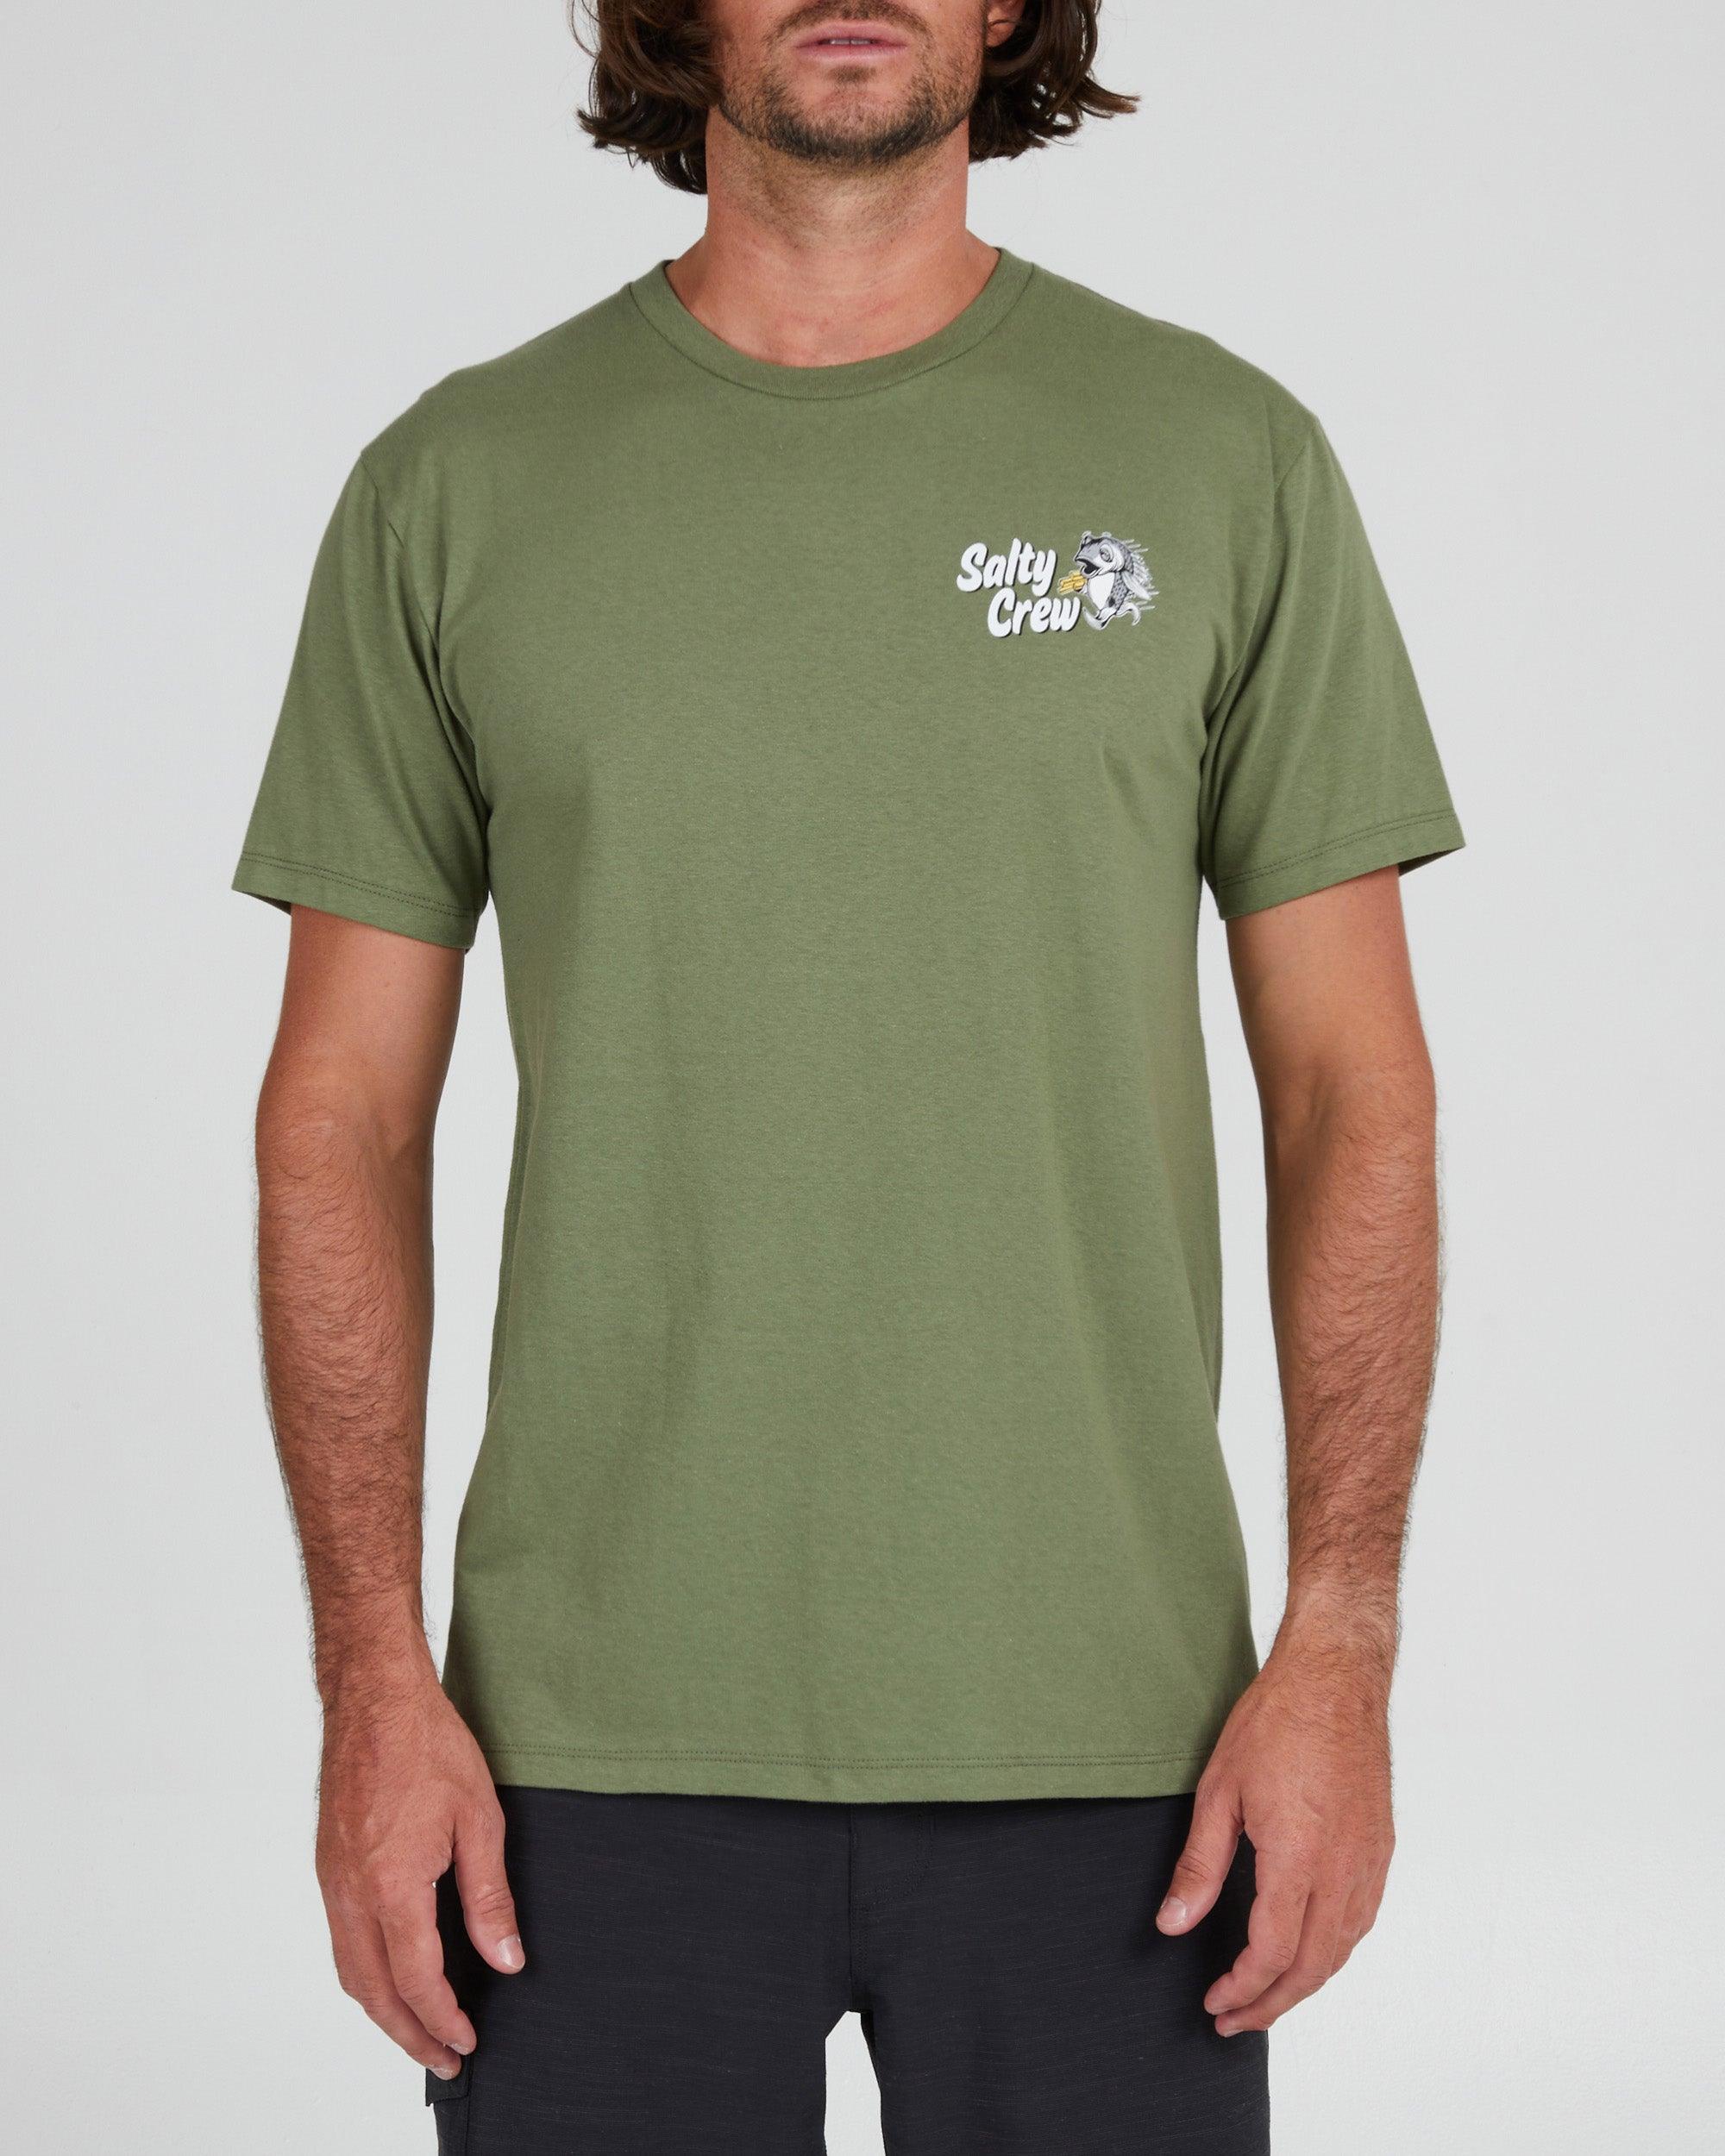 Fish & Chips S/S Premium Tee - Sage Green - Purpose-Built / Home of the Trades